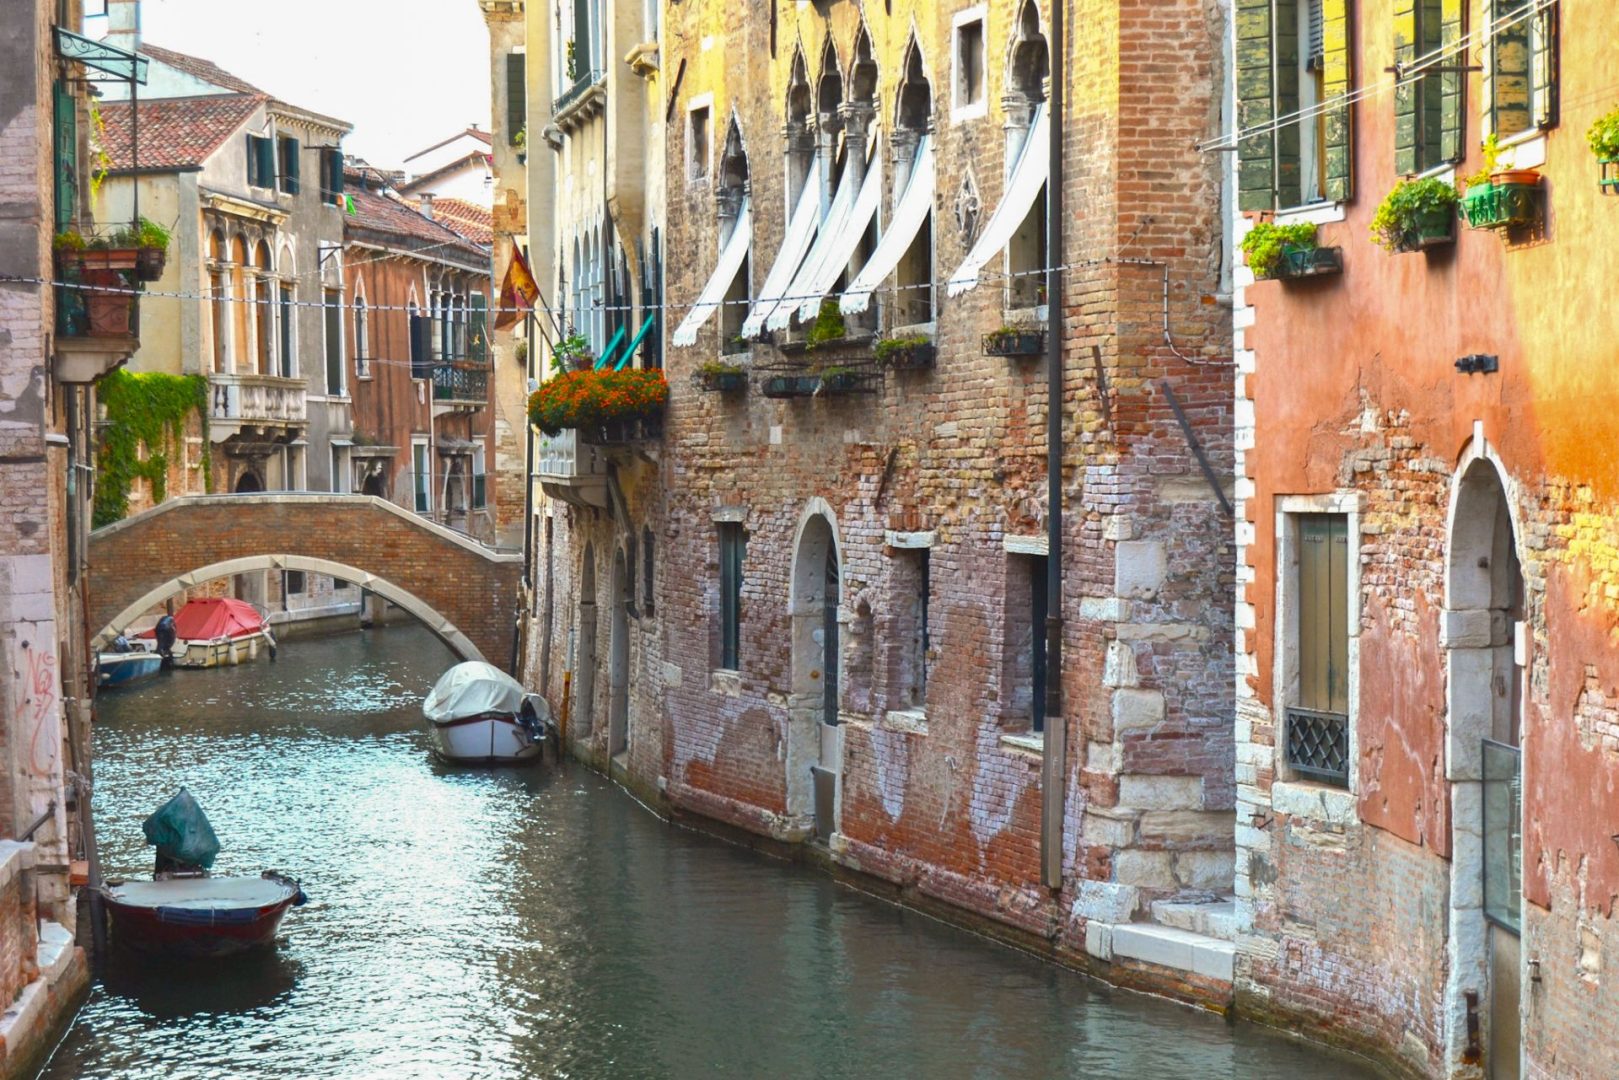 Colorful houses overlooking a little canal in Venice